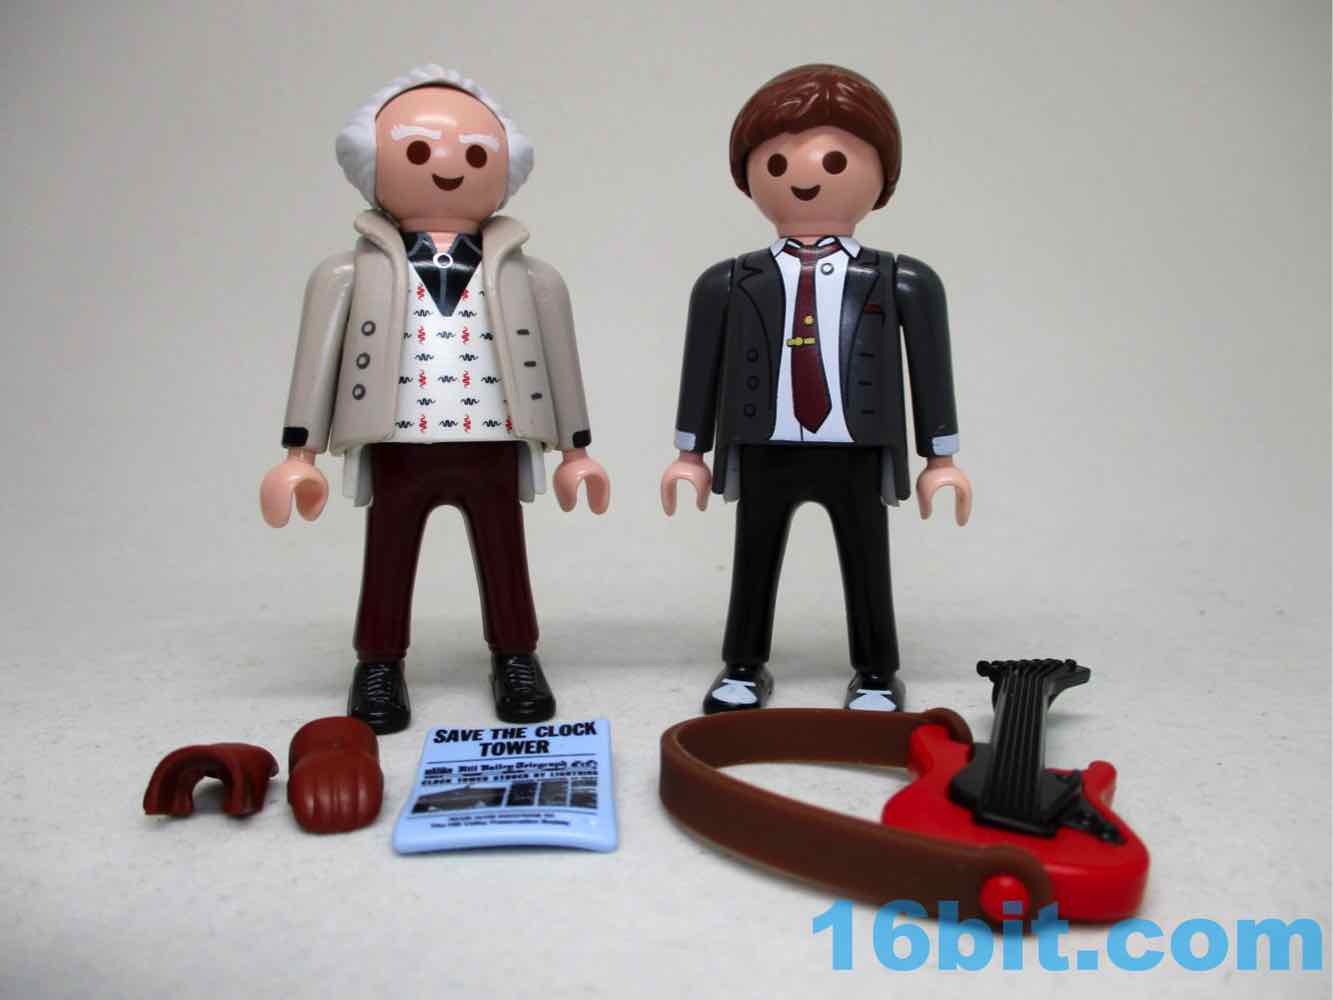 PLAYMOBIL 70459 6pcs Back to The Future Marty McFly & Doc Brown 1955 Edition for sale online 